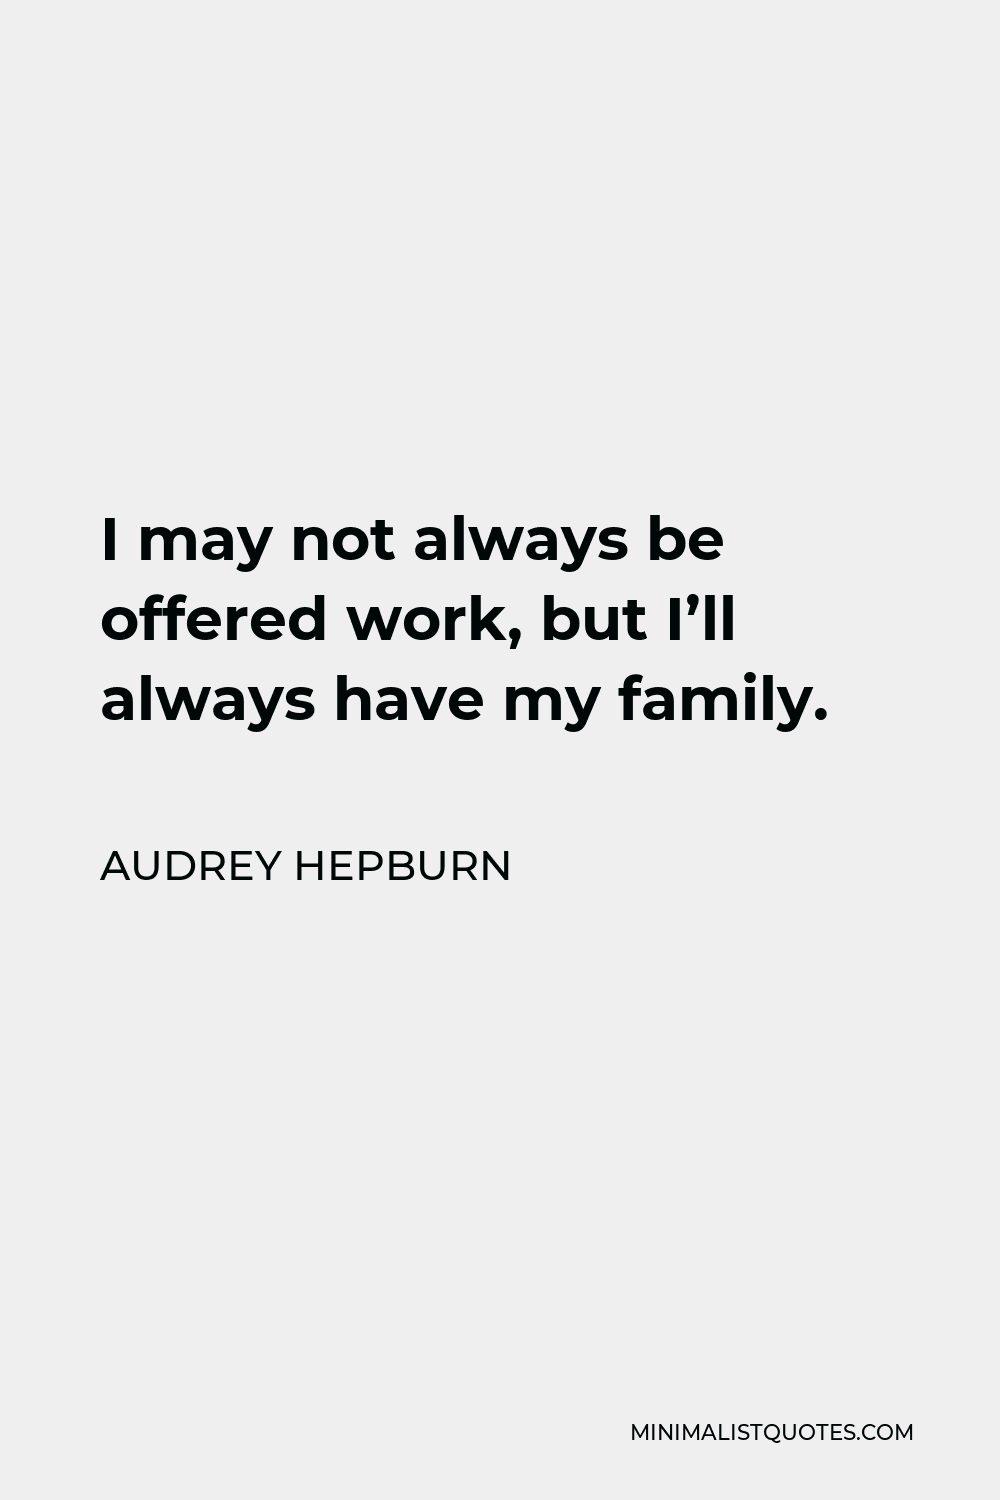 Audrey Hepburn Quote - I may not always be offered work, but I’ll always have my family.